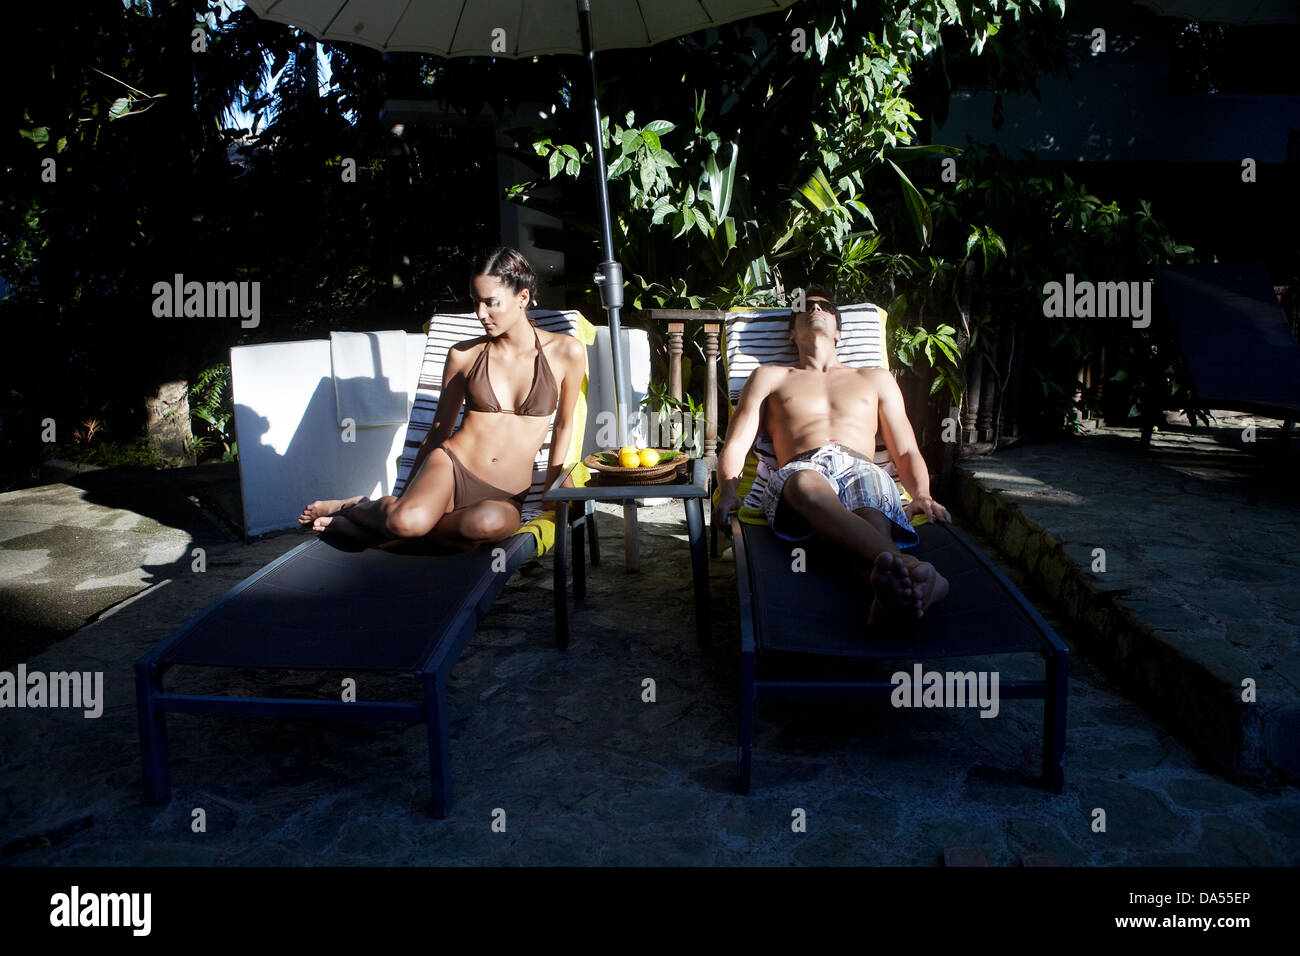 A couple relaxing poolside. Stock Photo